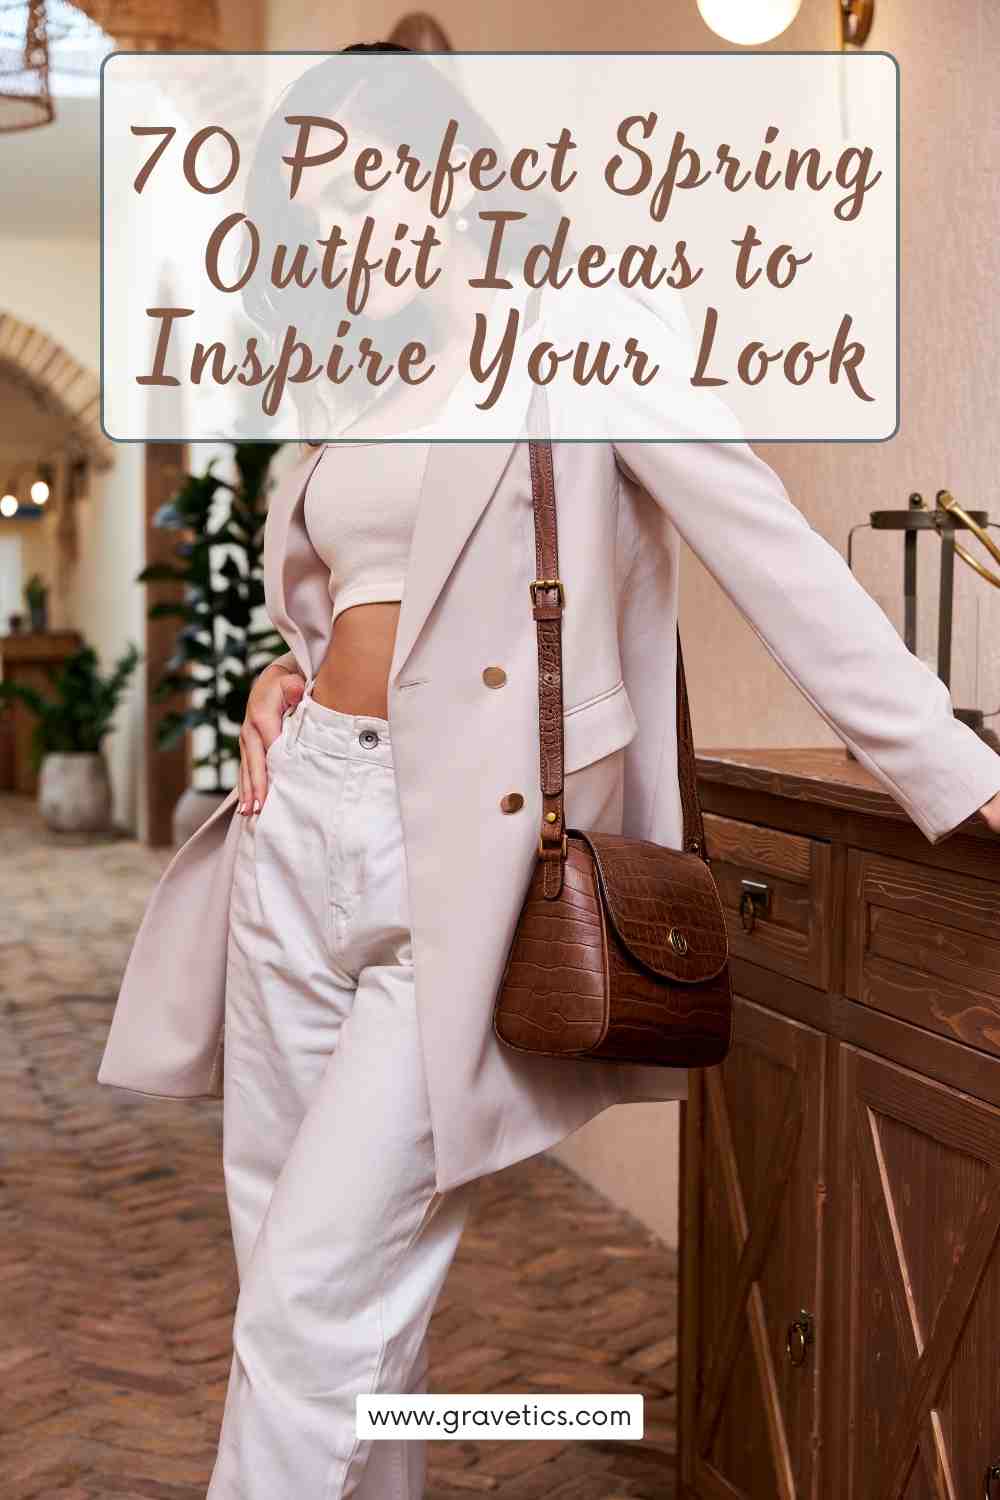 70 Perfect Spring Outfit Ideas to Inspire Your Look